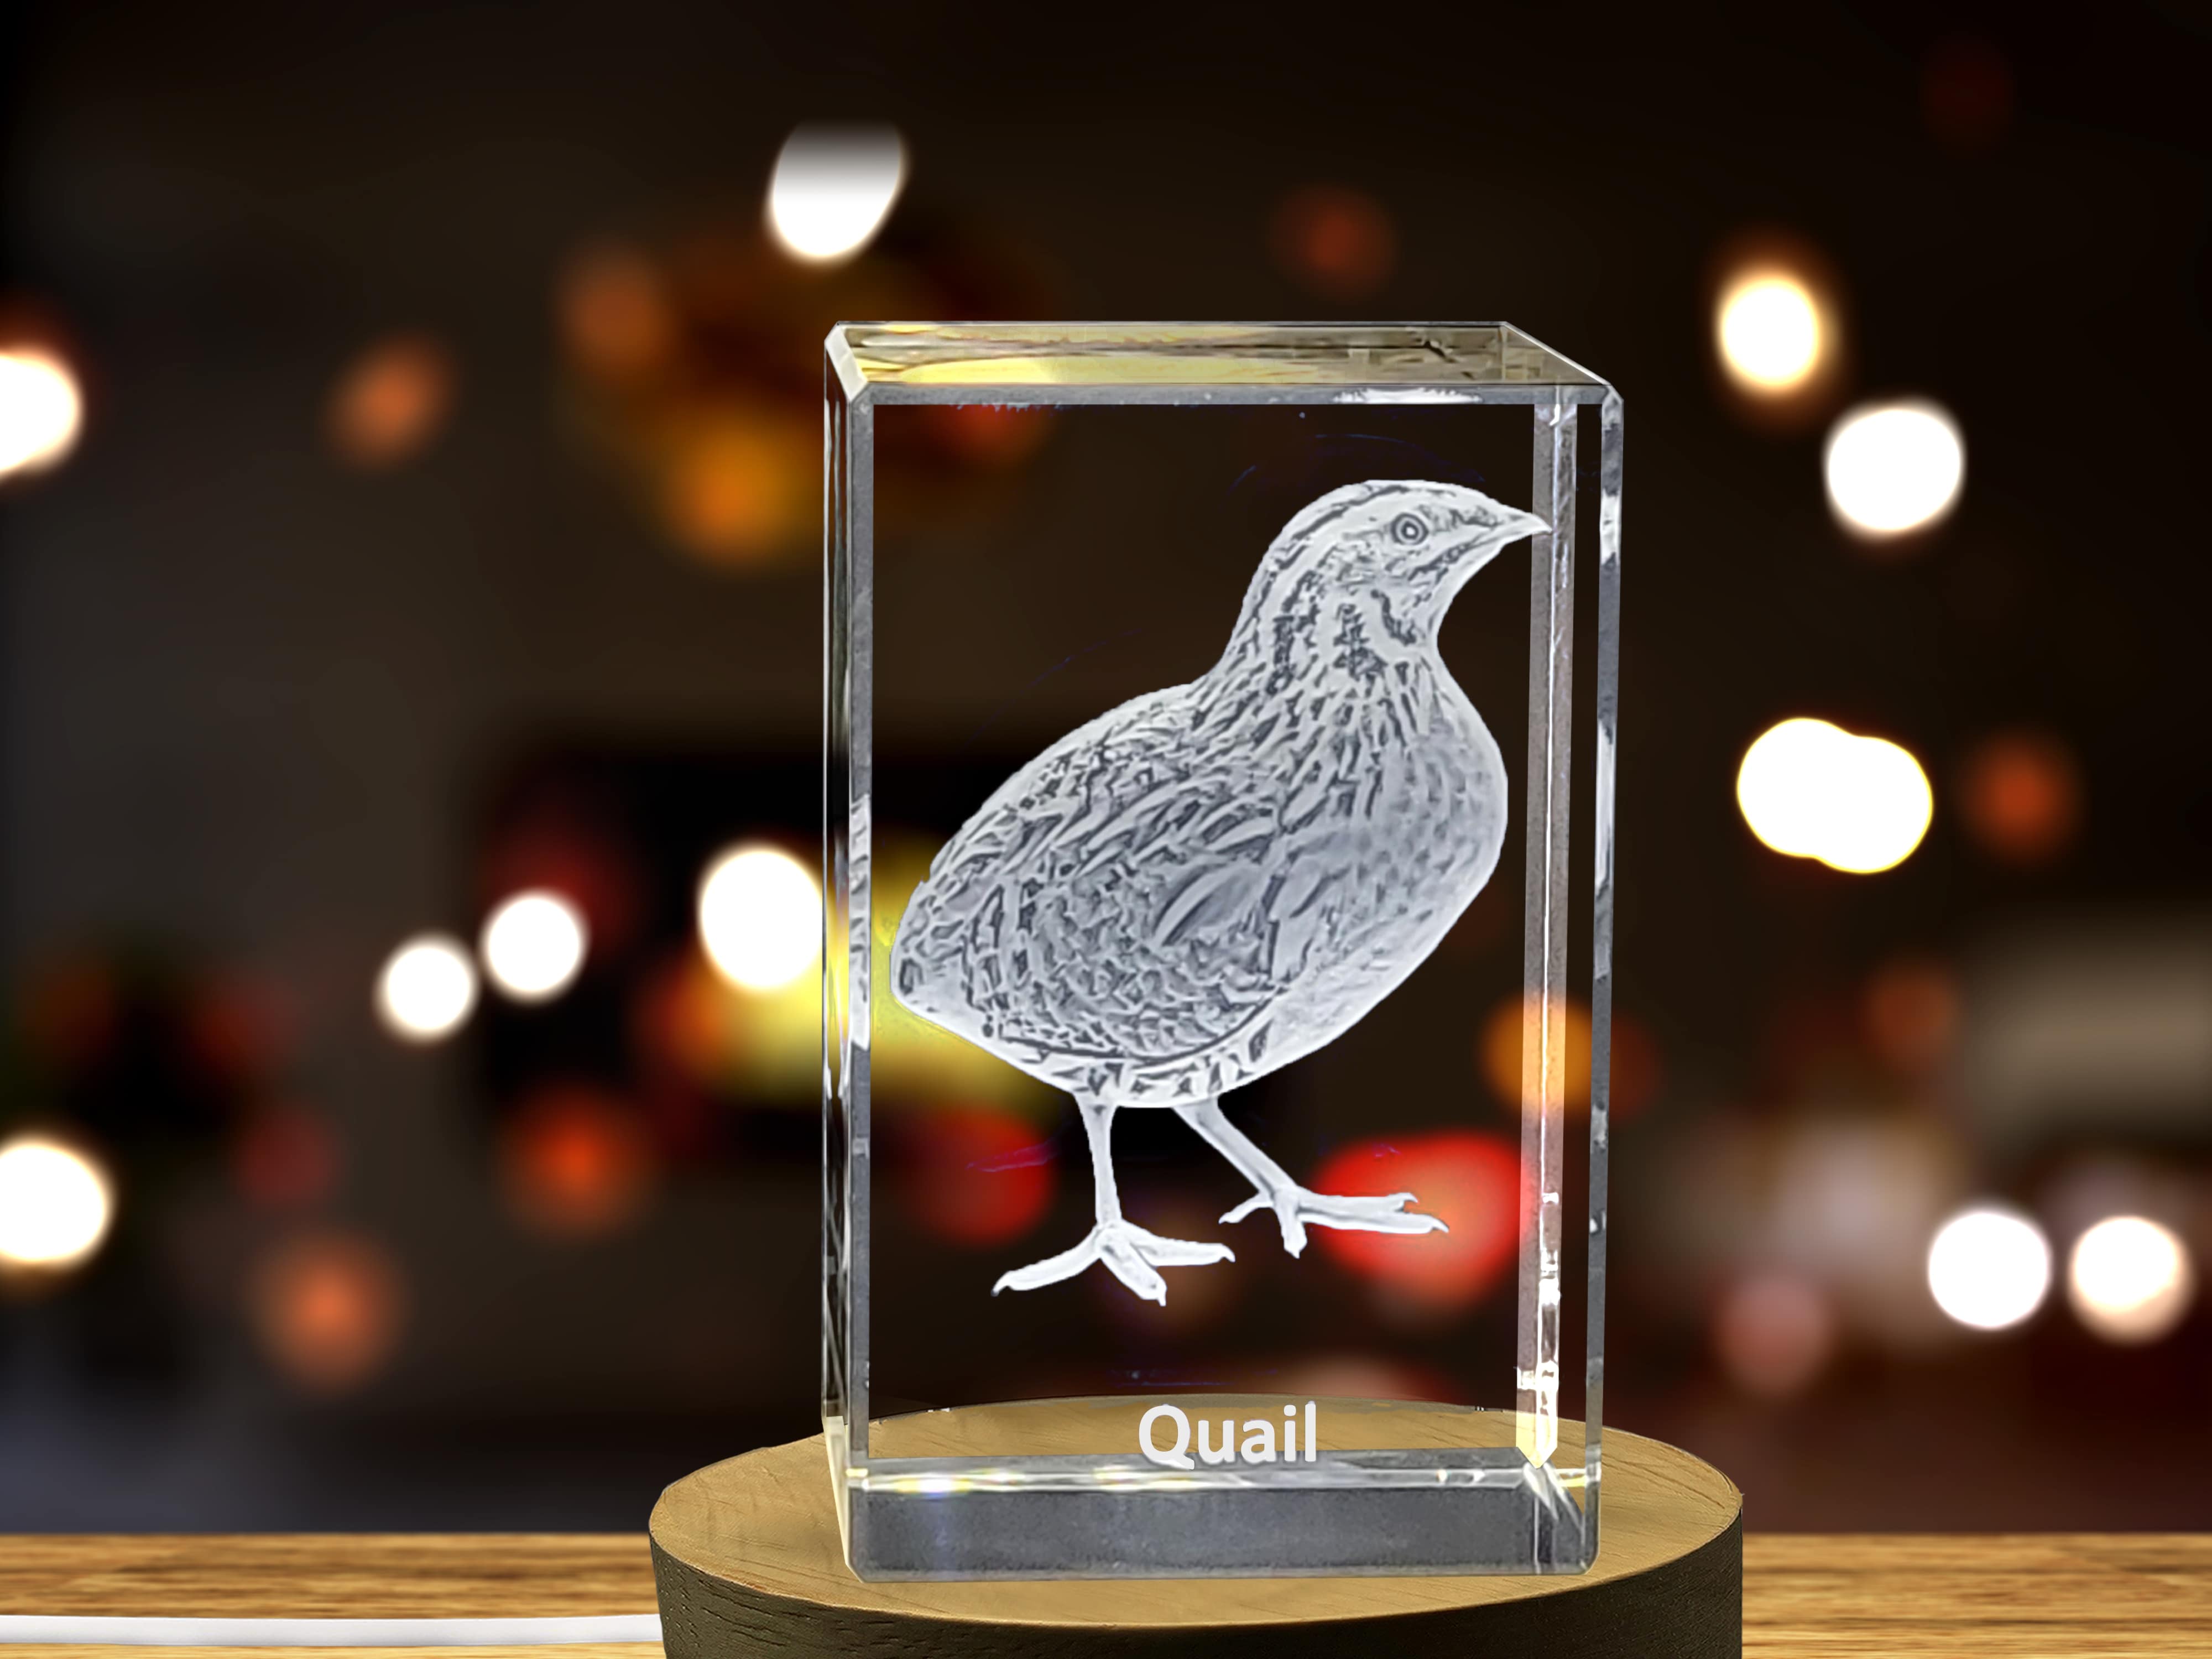 Exquisitely Engraved Pair of Quail | 3D Engraved Crystal A&B Crystal Collection